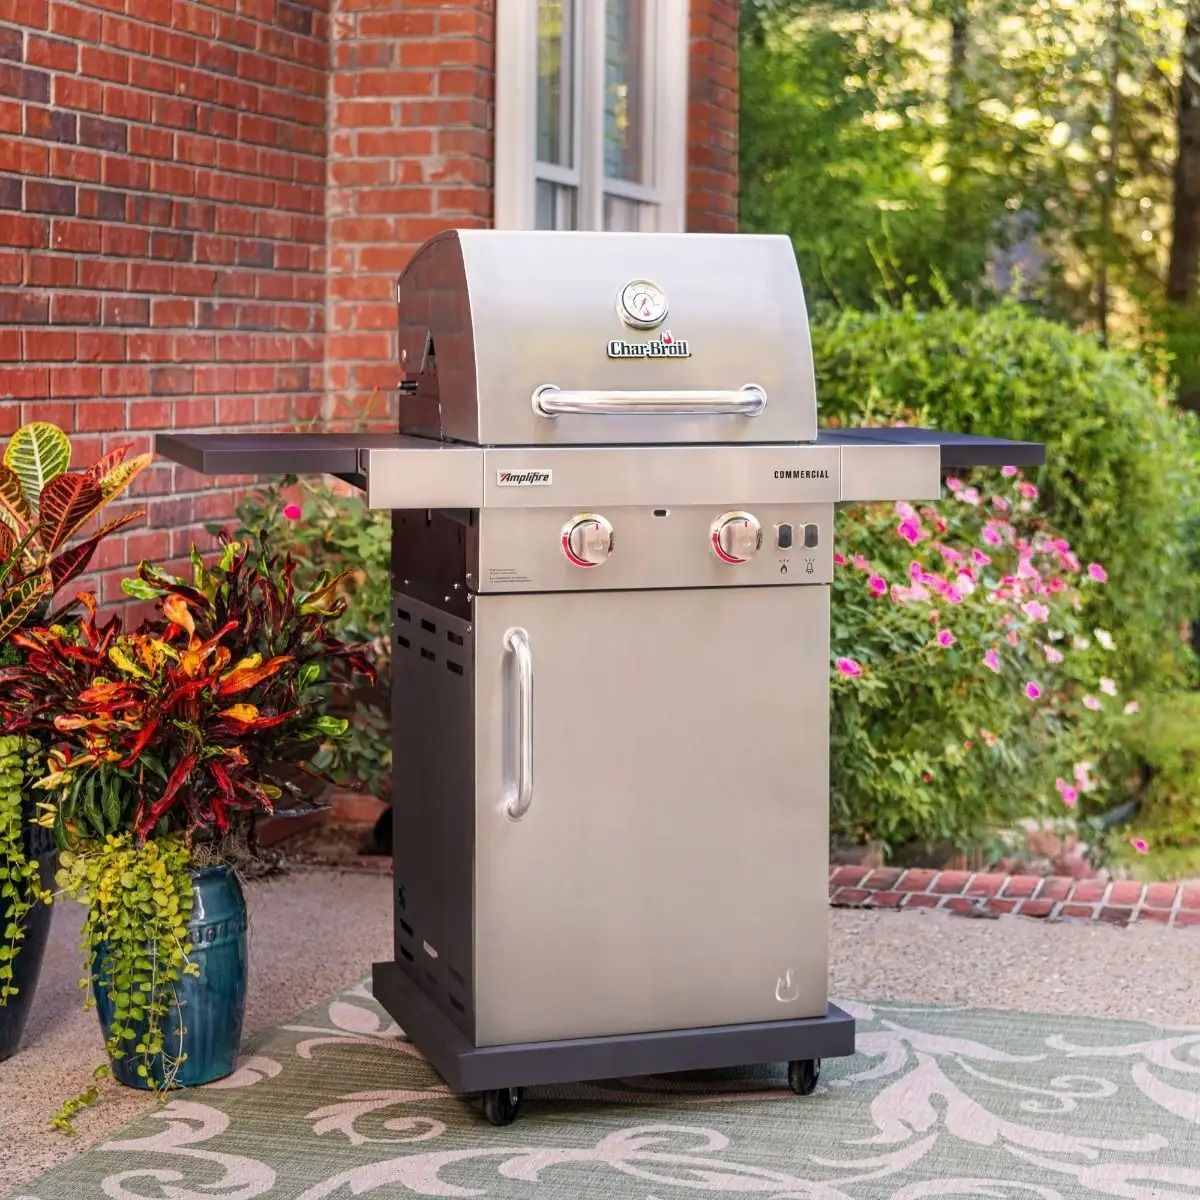 The Char-Broil® COMMERCIAL SERIES™ AMPLIFIRE™ 2-BURNER GAS GRILL